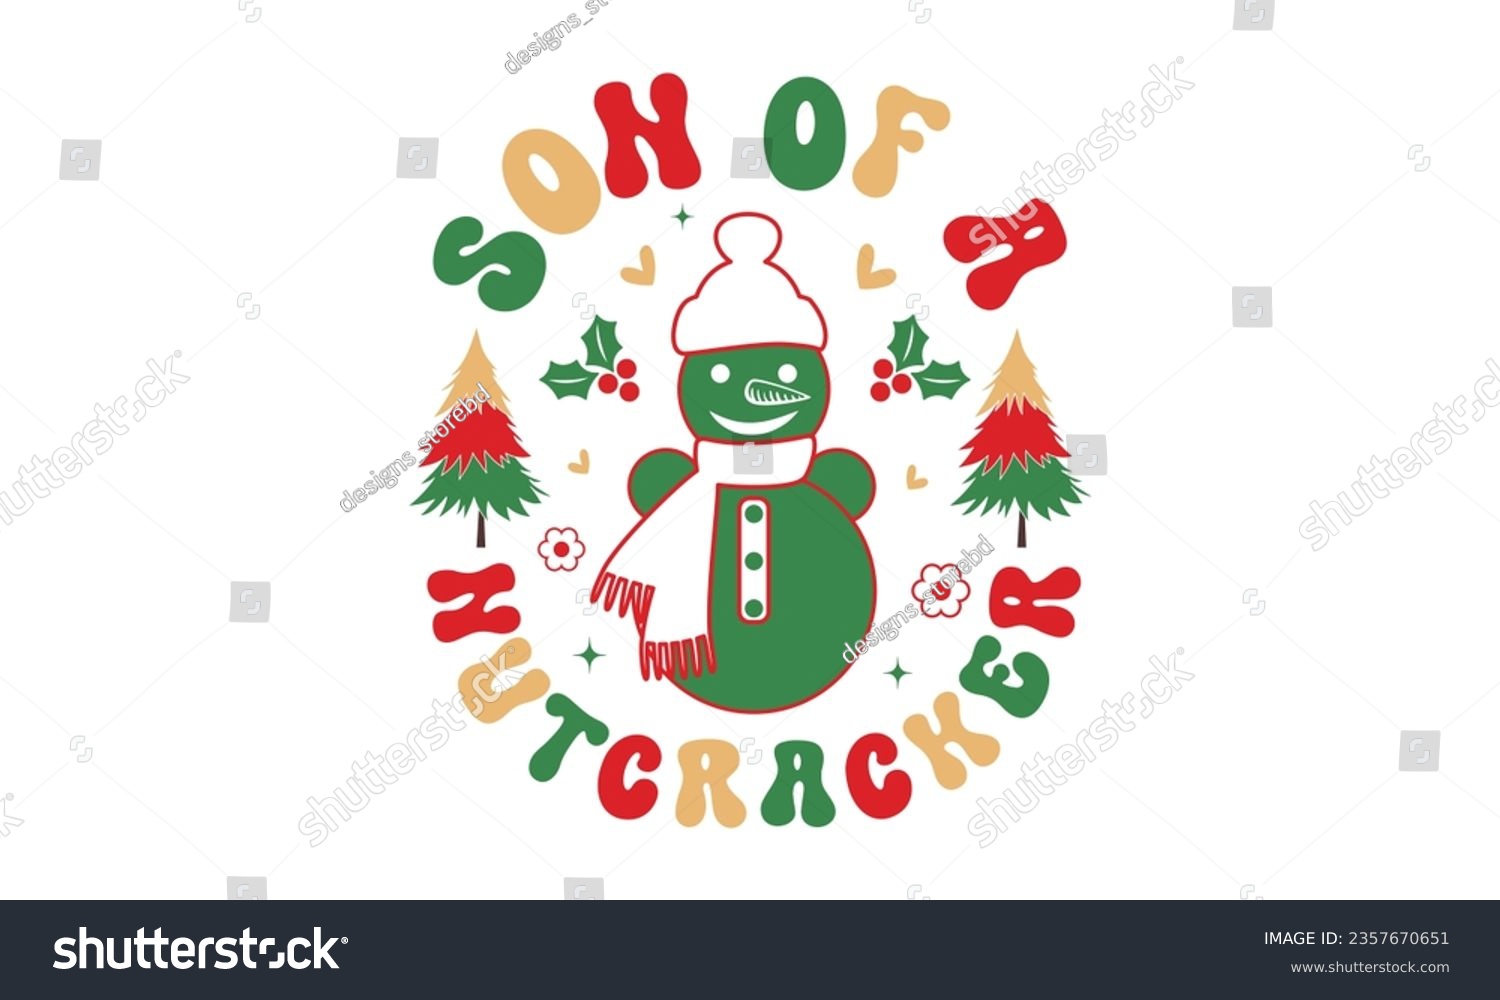 SVG of Son of a nutcracker svg, Funny Christmas svg t-shirt design Bundle, Retro Christmas svg , Merry Christmas , Winter, Xmas, Holiday and Santa svg, Commercial Use, Cut Files Cricut, Silhouette, eps, png svg